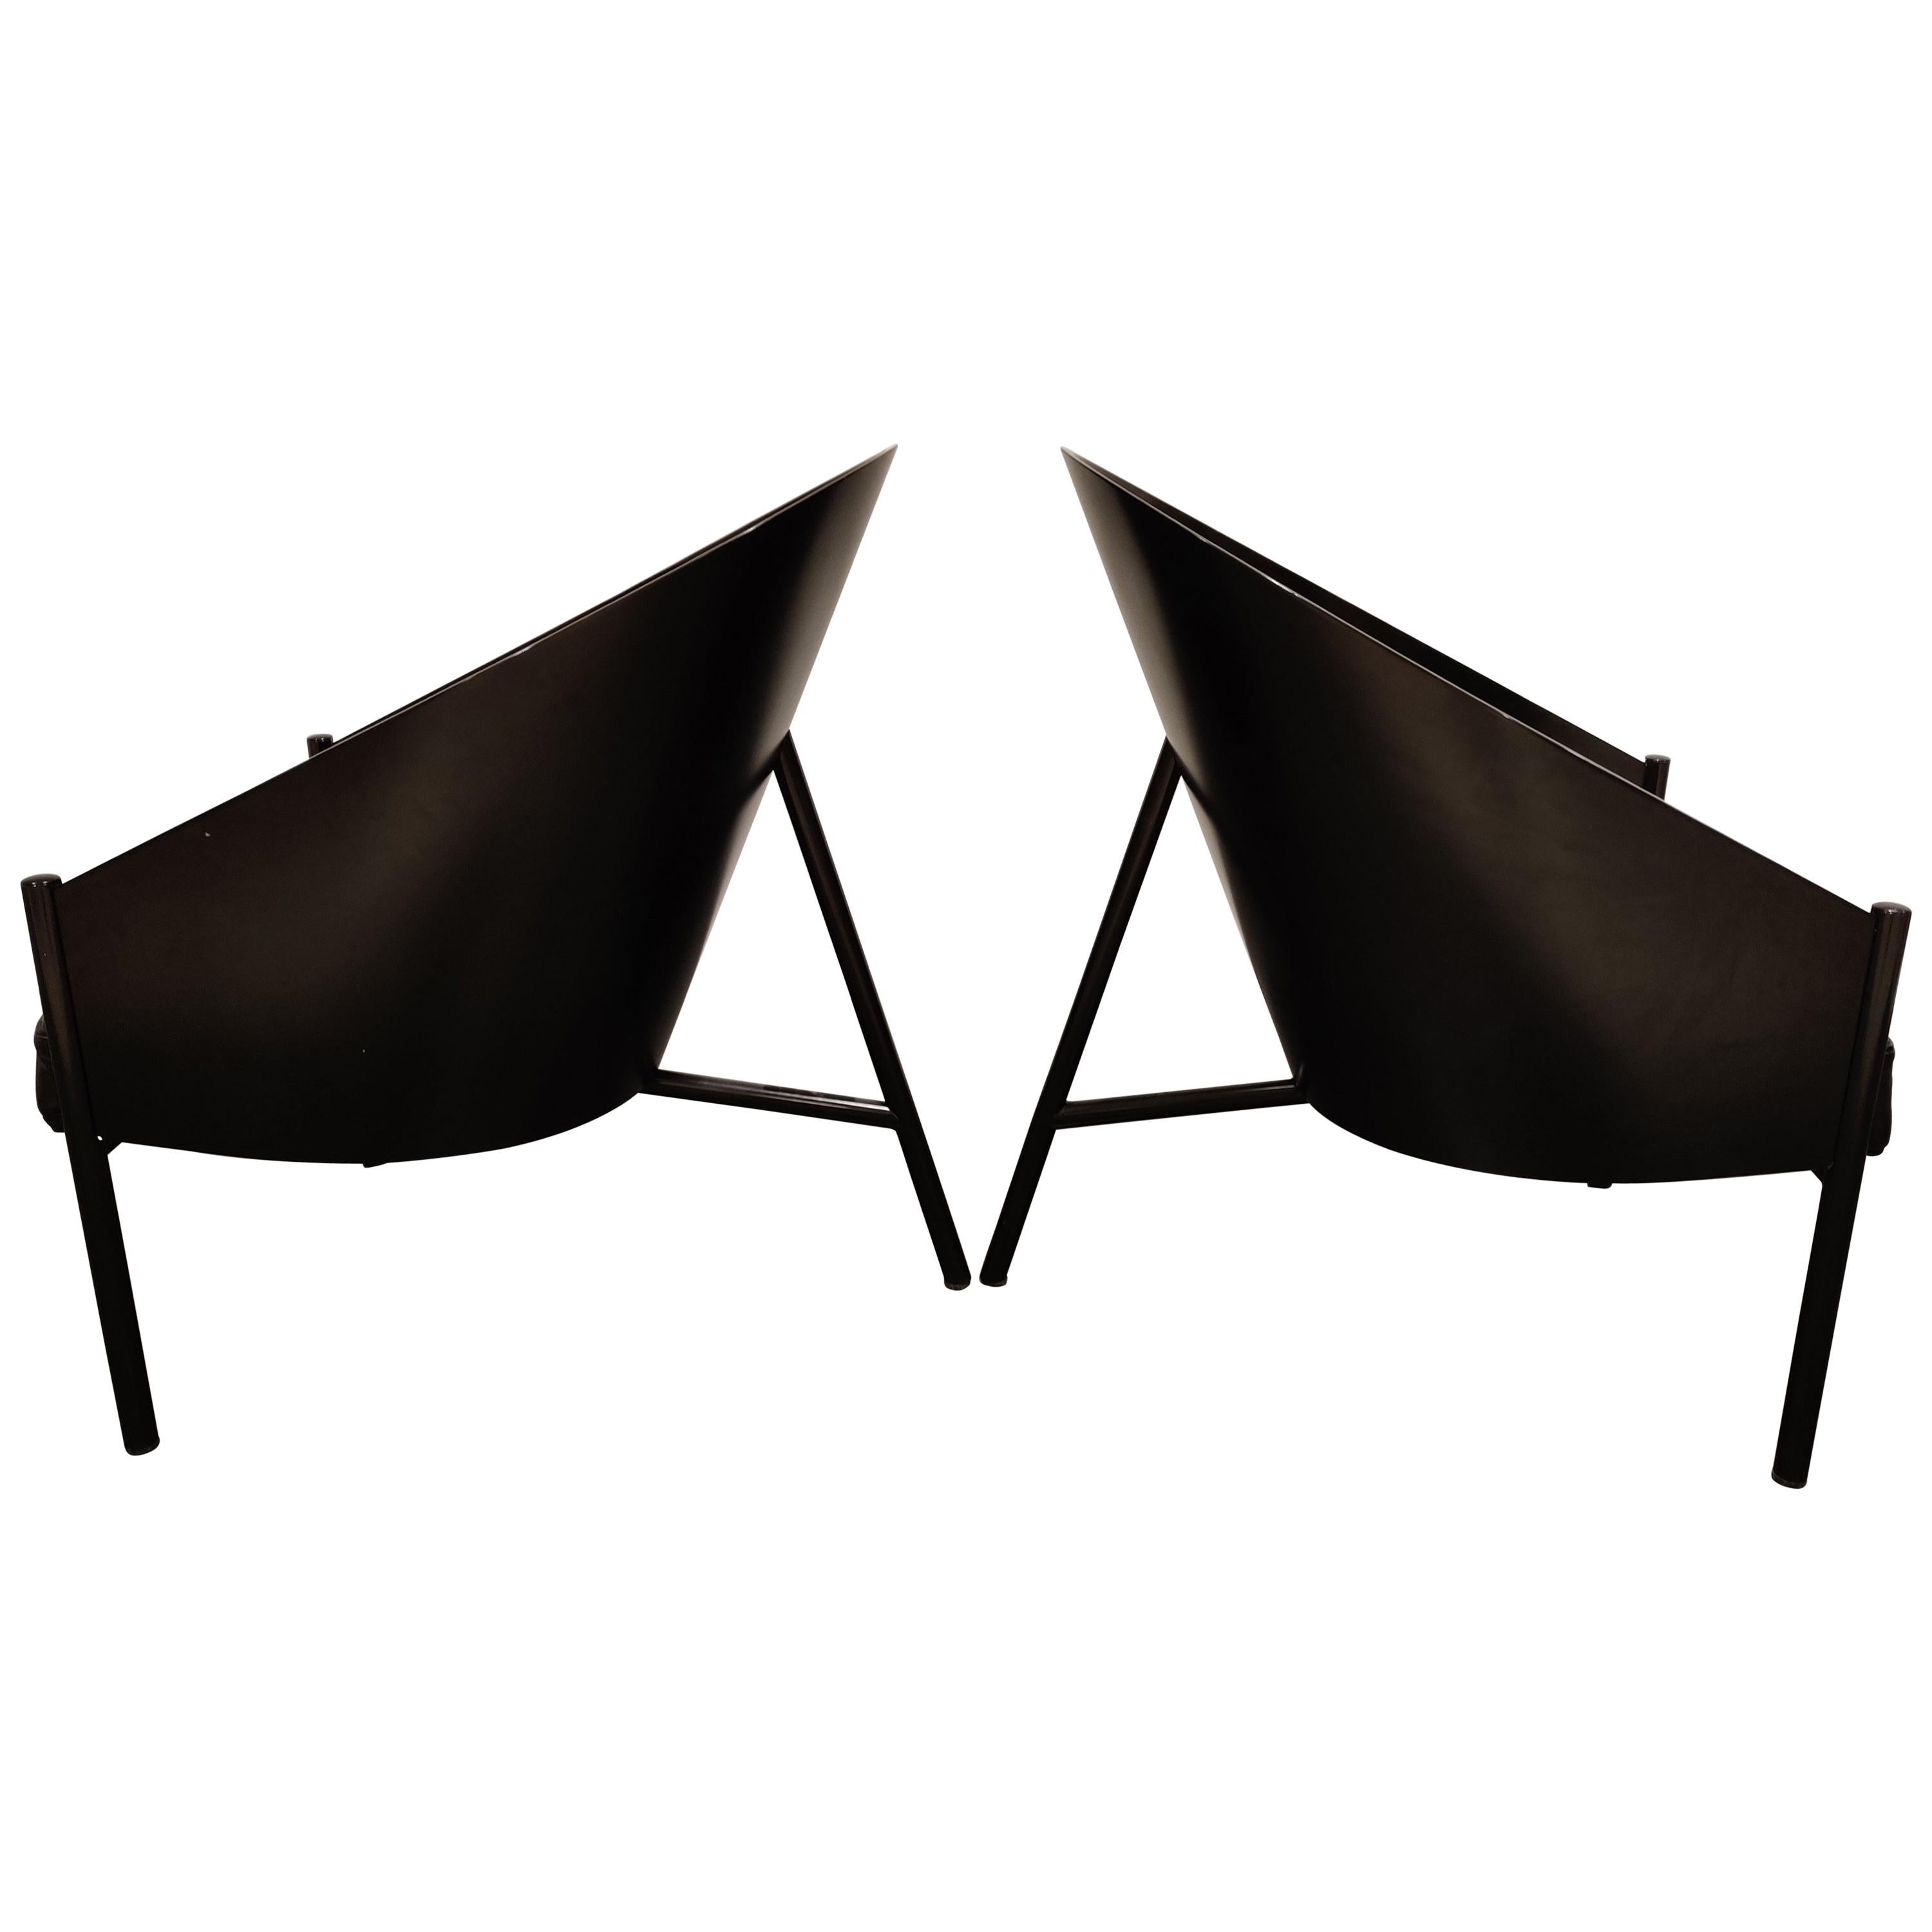 Pair of Vintage Pratfall Chairs by Philippe Starck for Driade, 1982